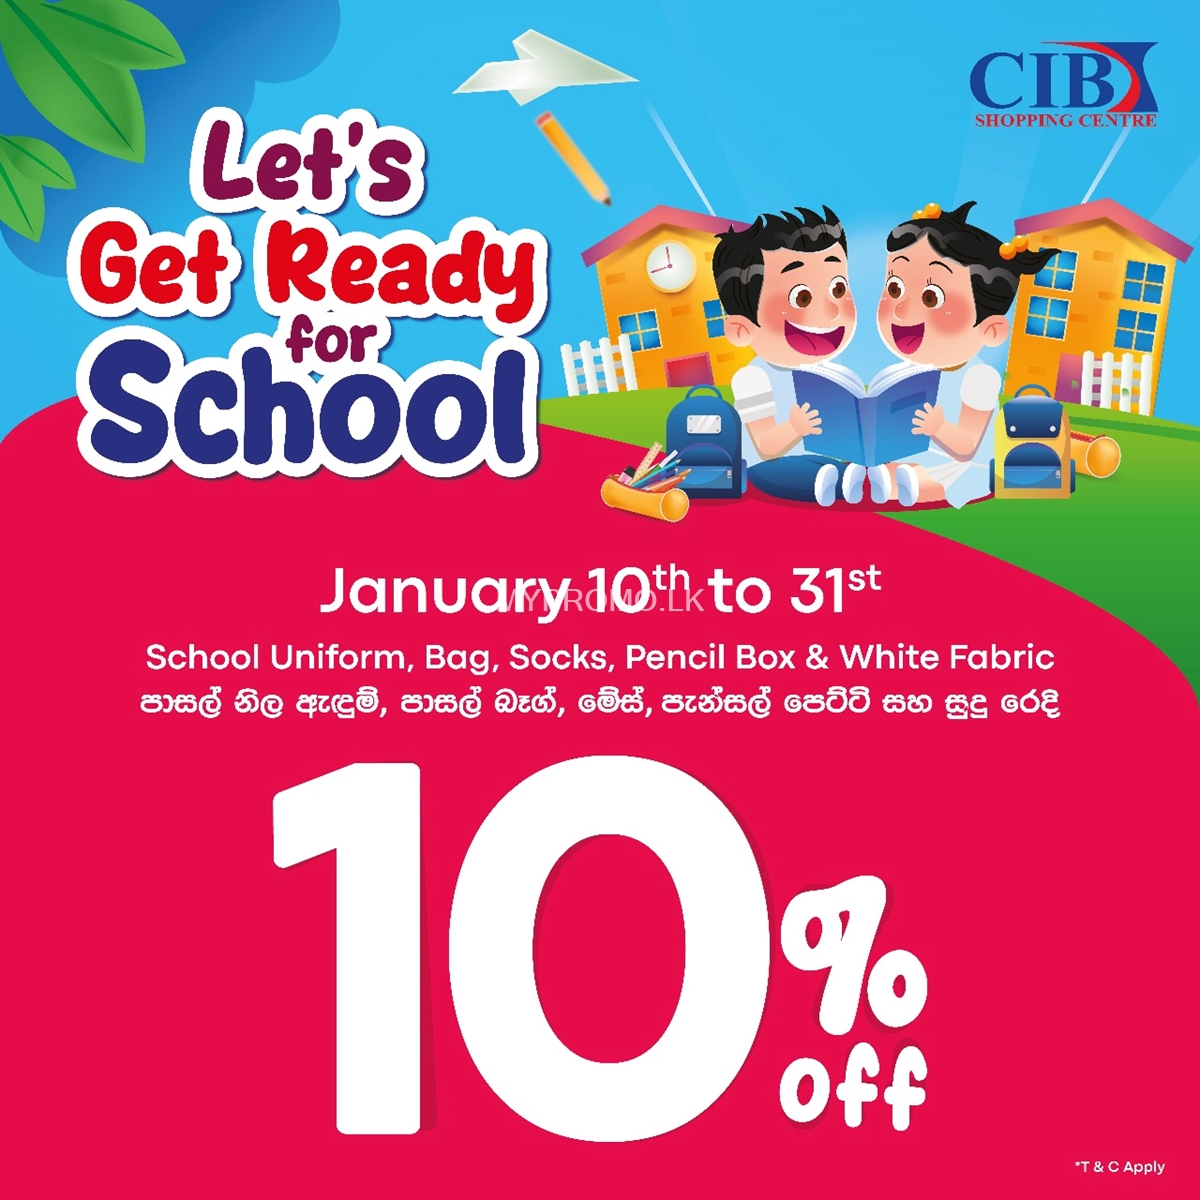 School uniforms, school bags, socks, pencil boxes and white clothes at affordable price at CIB Shopping Centre